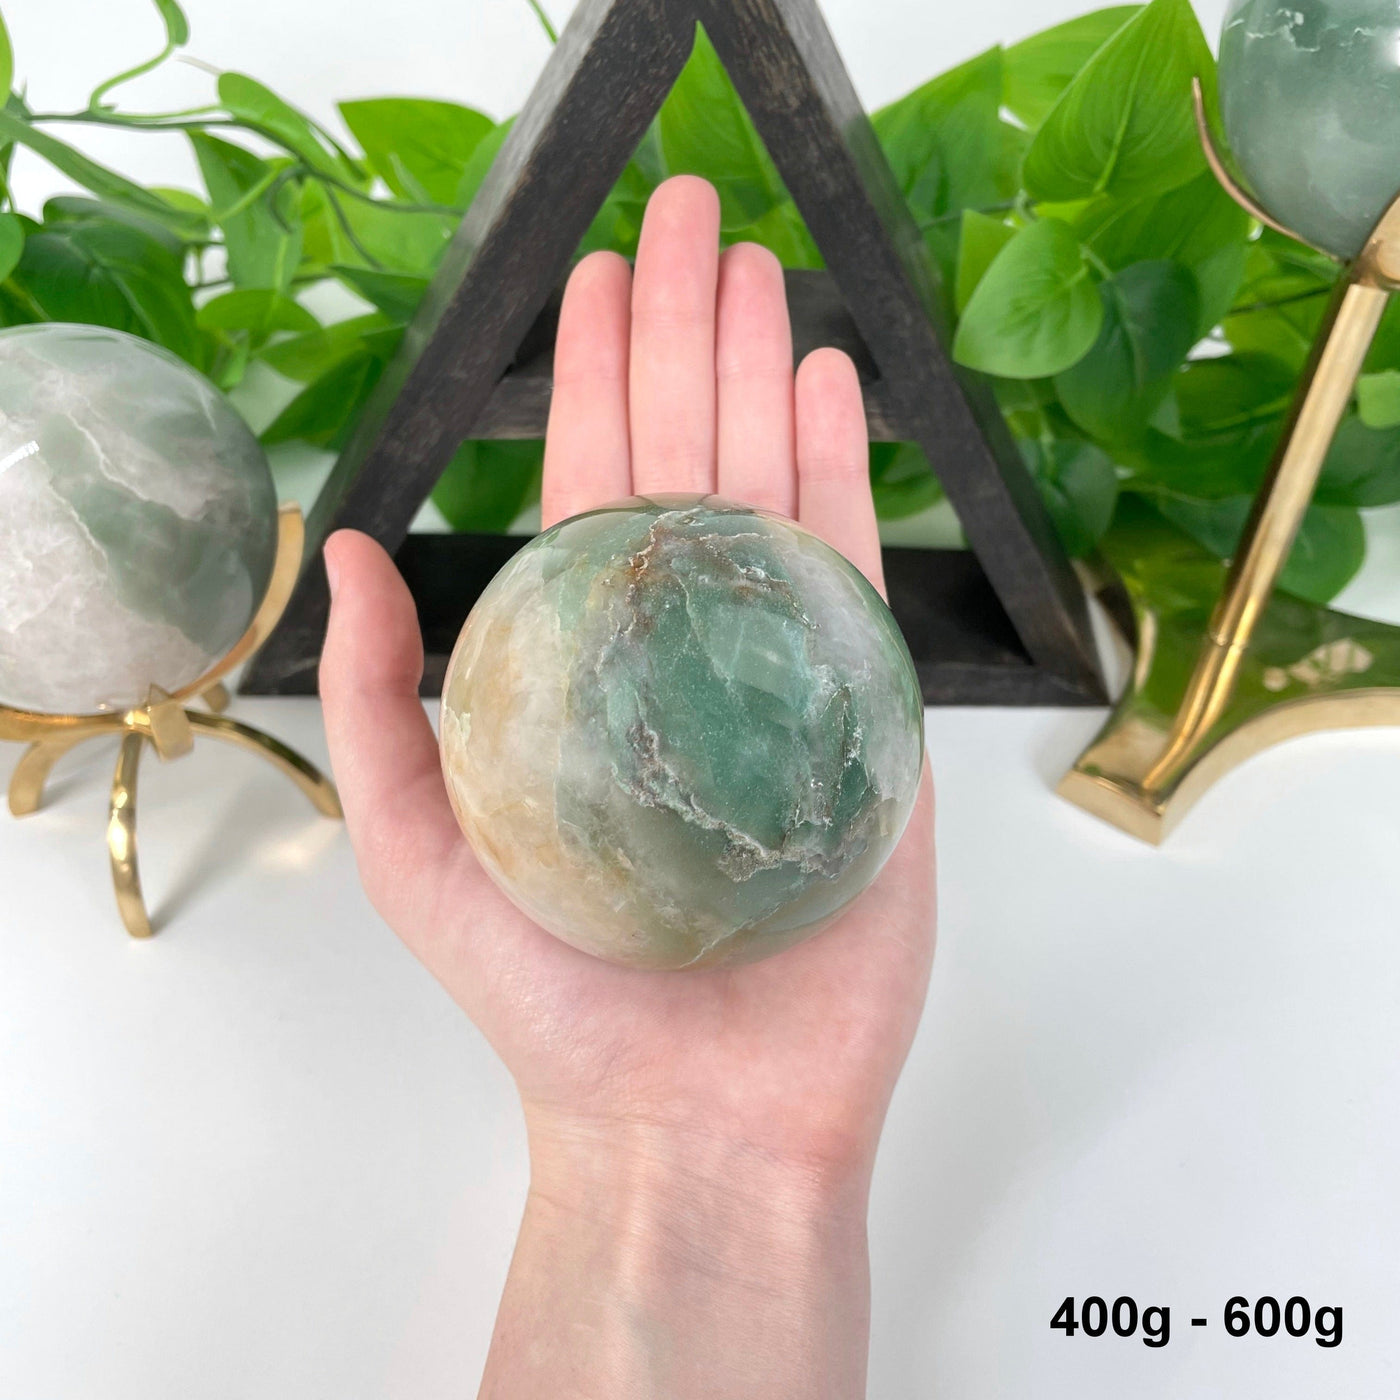 one 400g - 600g green and white quartz sphere in hand for size reference